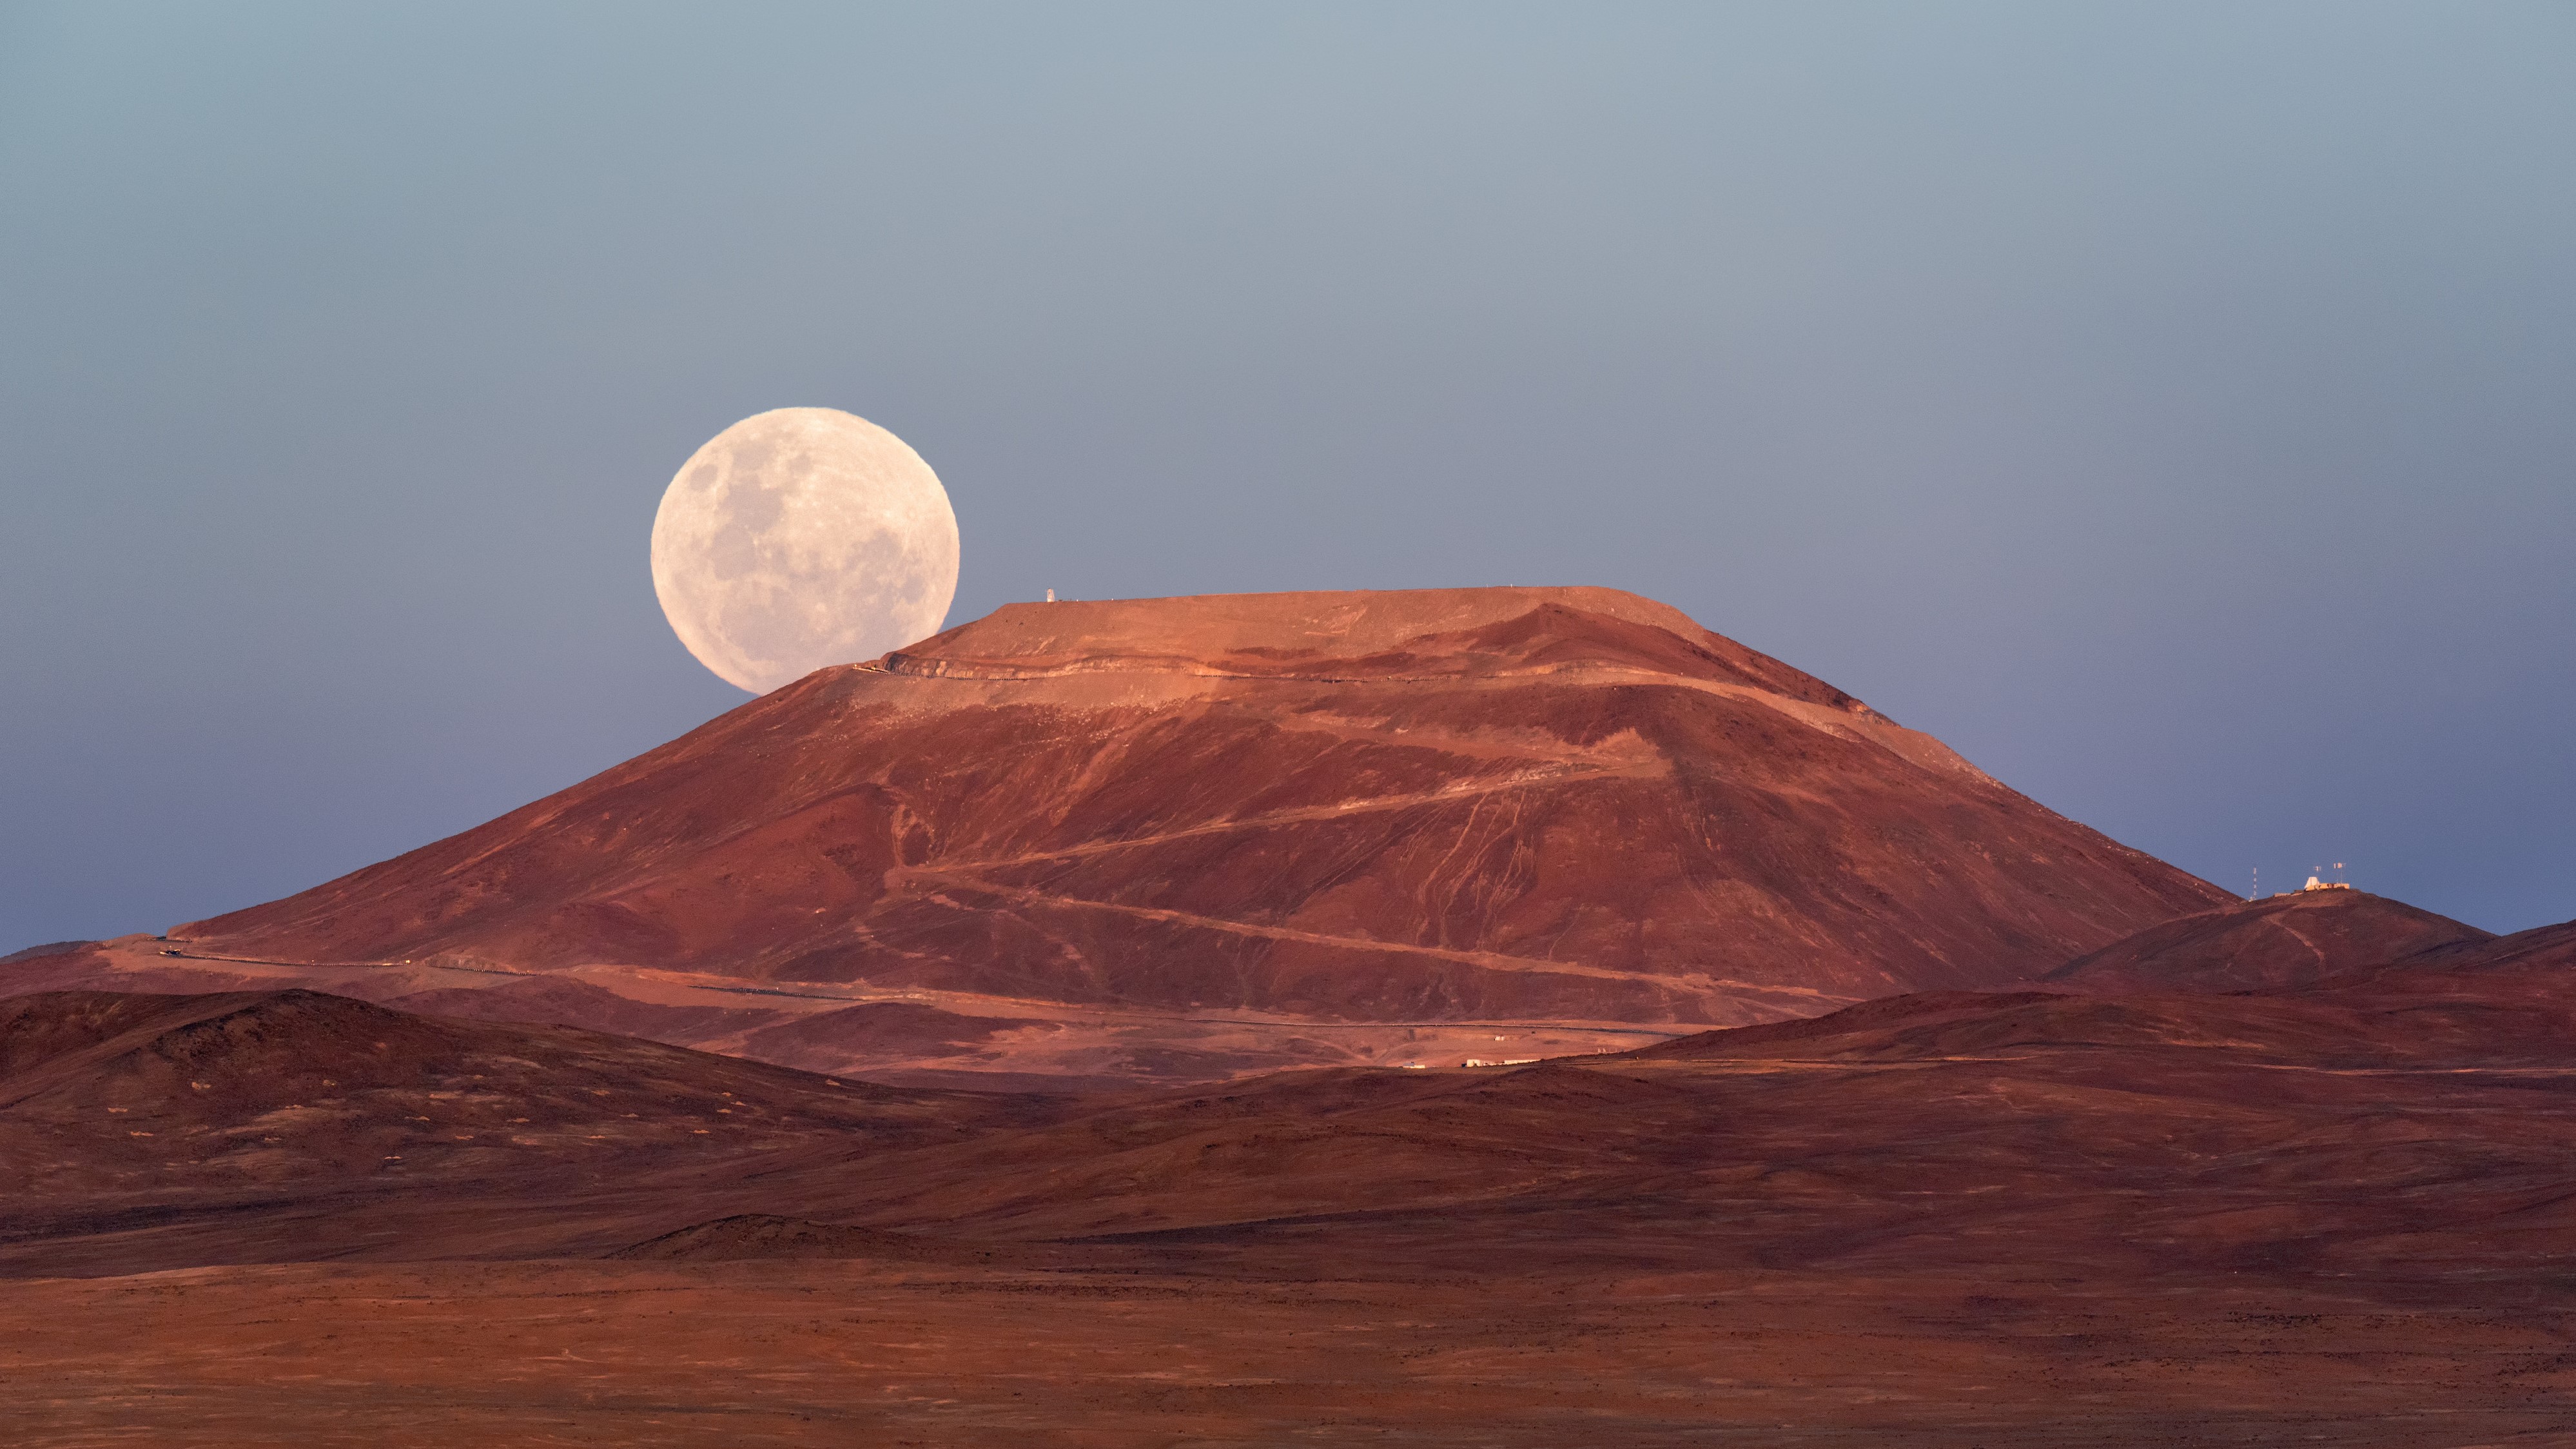 Sometimes the moon can look particularly big when rising or setting near the horizon. This image shows a stunning supermoon rising up from behind the Cerro Armazones mountain in Chile.